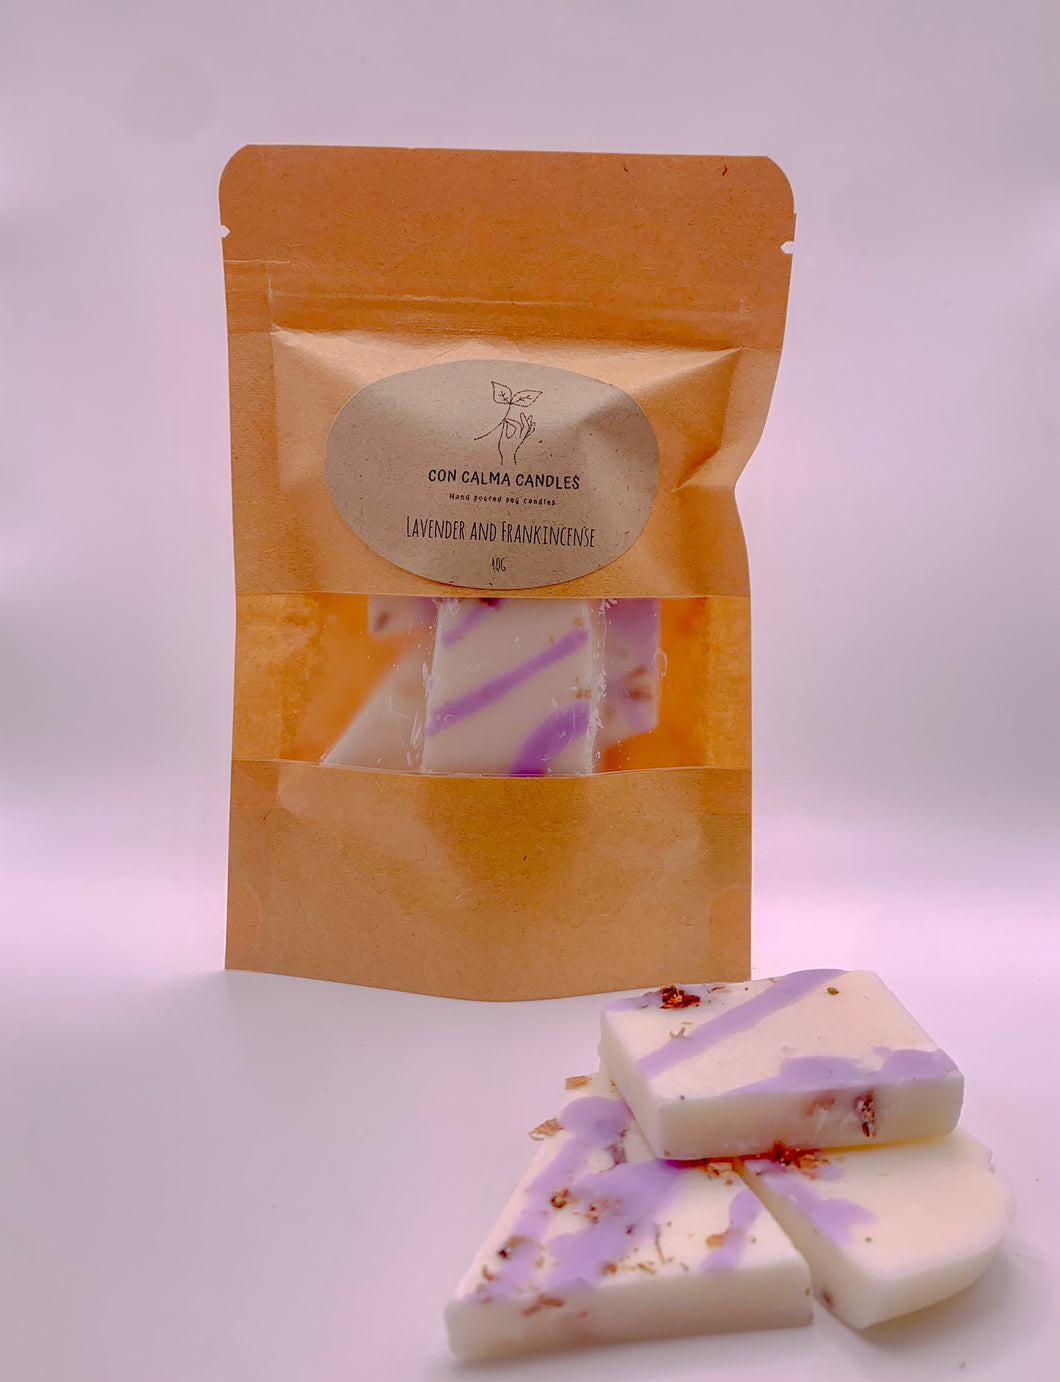 Lavender and Frankincense wax brittle